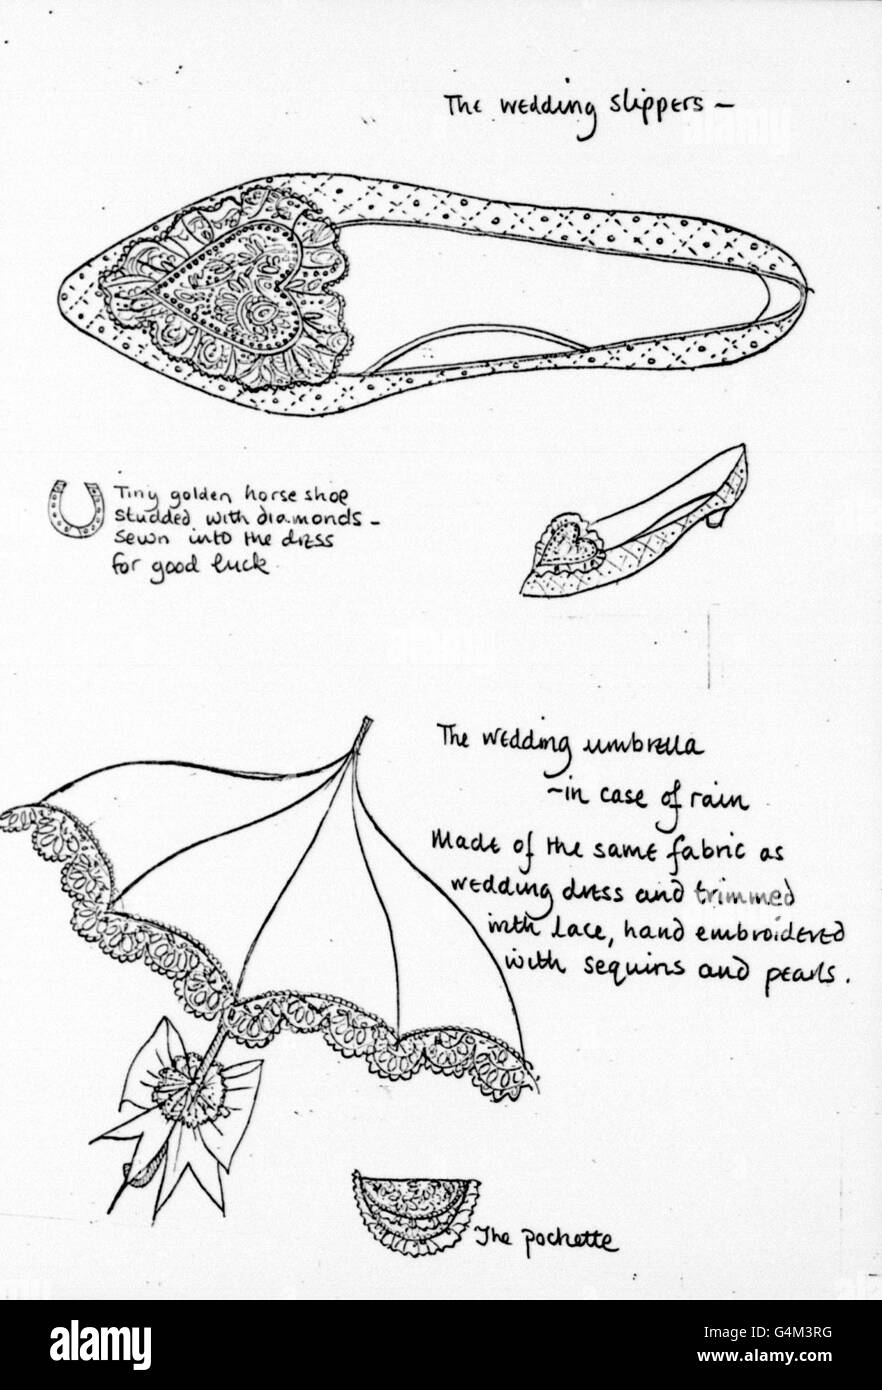 Sketches of accessories which will be worn or carried by Lady Diana Spencer during her wedding to the Prince of Wales at St. Paul's Cathedral in London. Clive Shilton created the slippers. A tiny golden horseshoe studded with diamonds has been sewn in to her dress, designed by Elizabeth and David Emanuel, for good luck. There is a pochette and, in case of inclement weather, a wedding umbrella matching her dress. Stock Photo